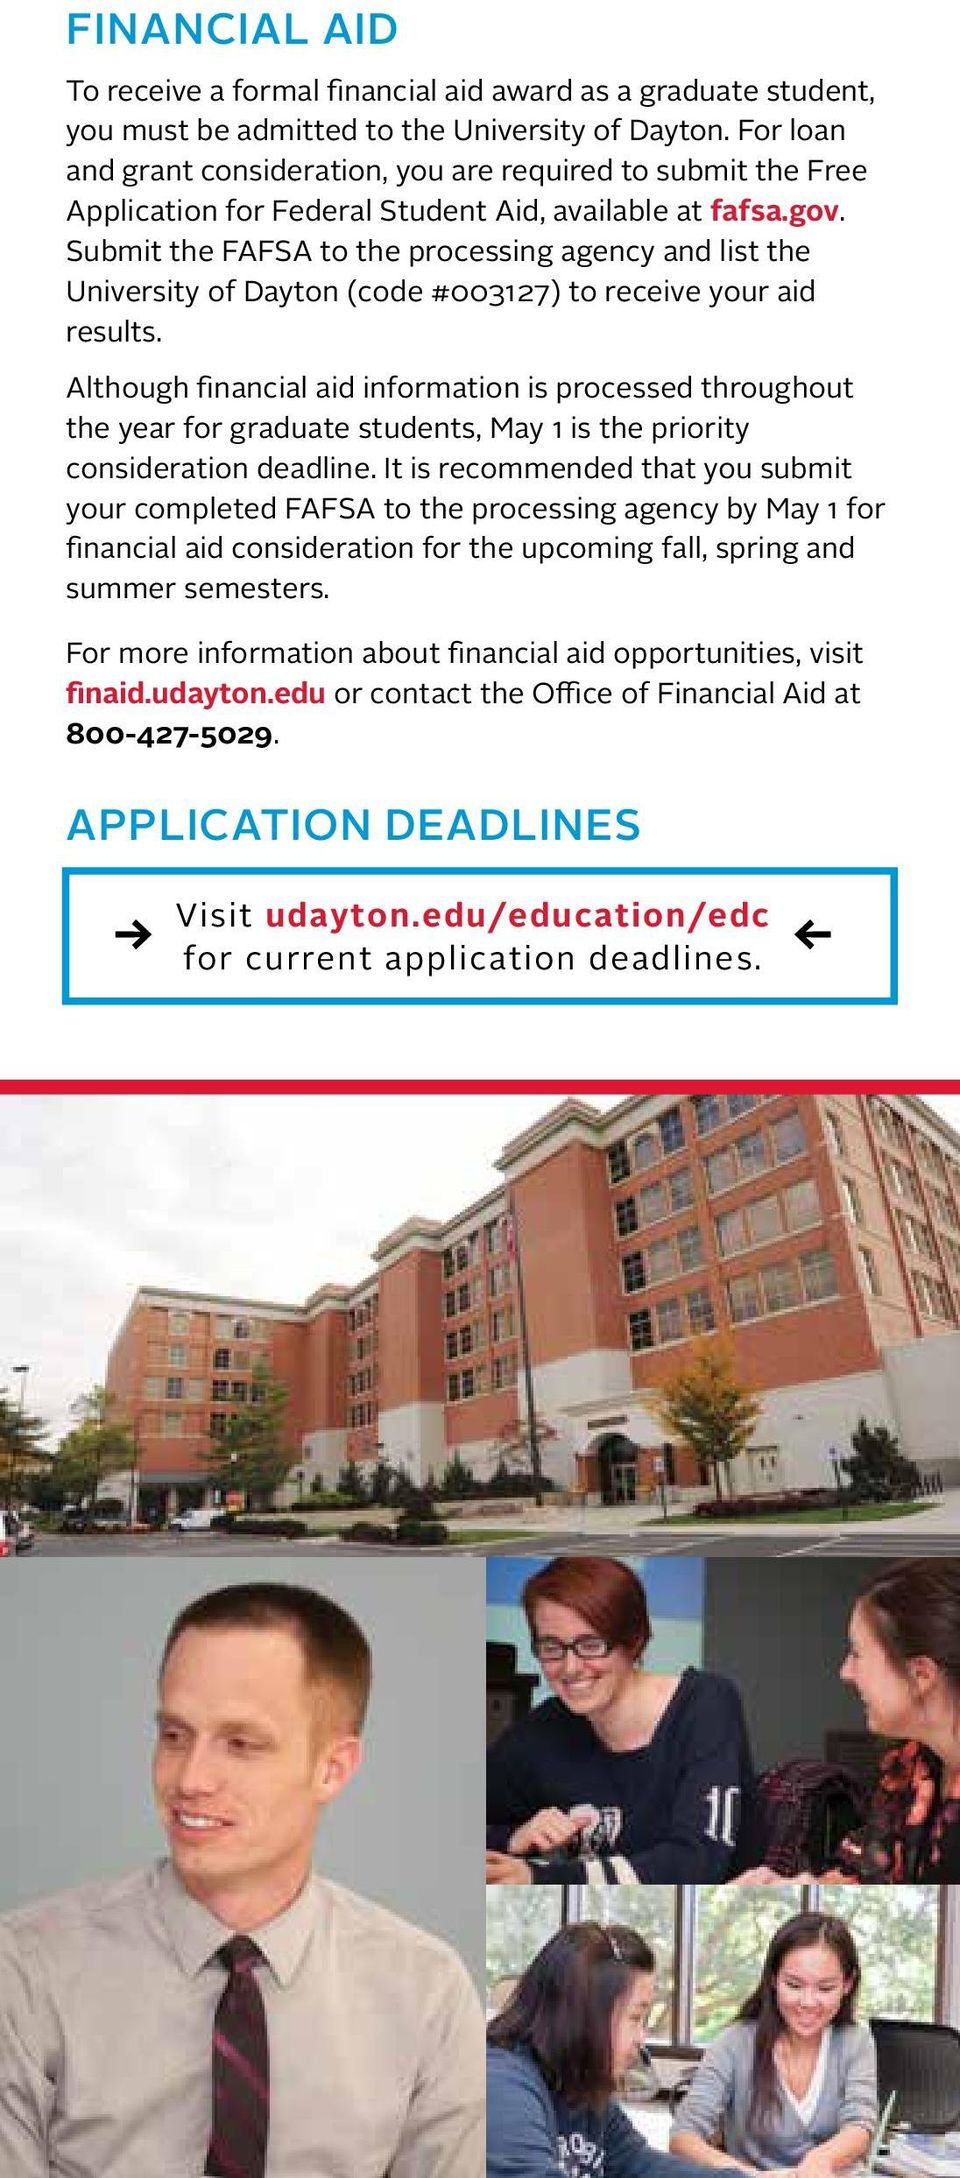 Submit the FAFSA to the processing agency and list the University of Dayton (code #003127) to receive your aid results.